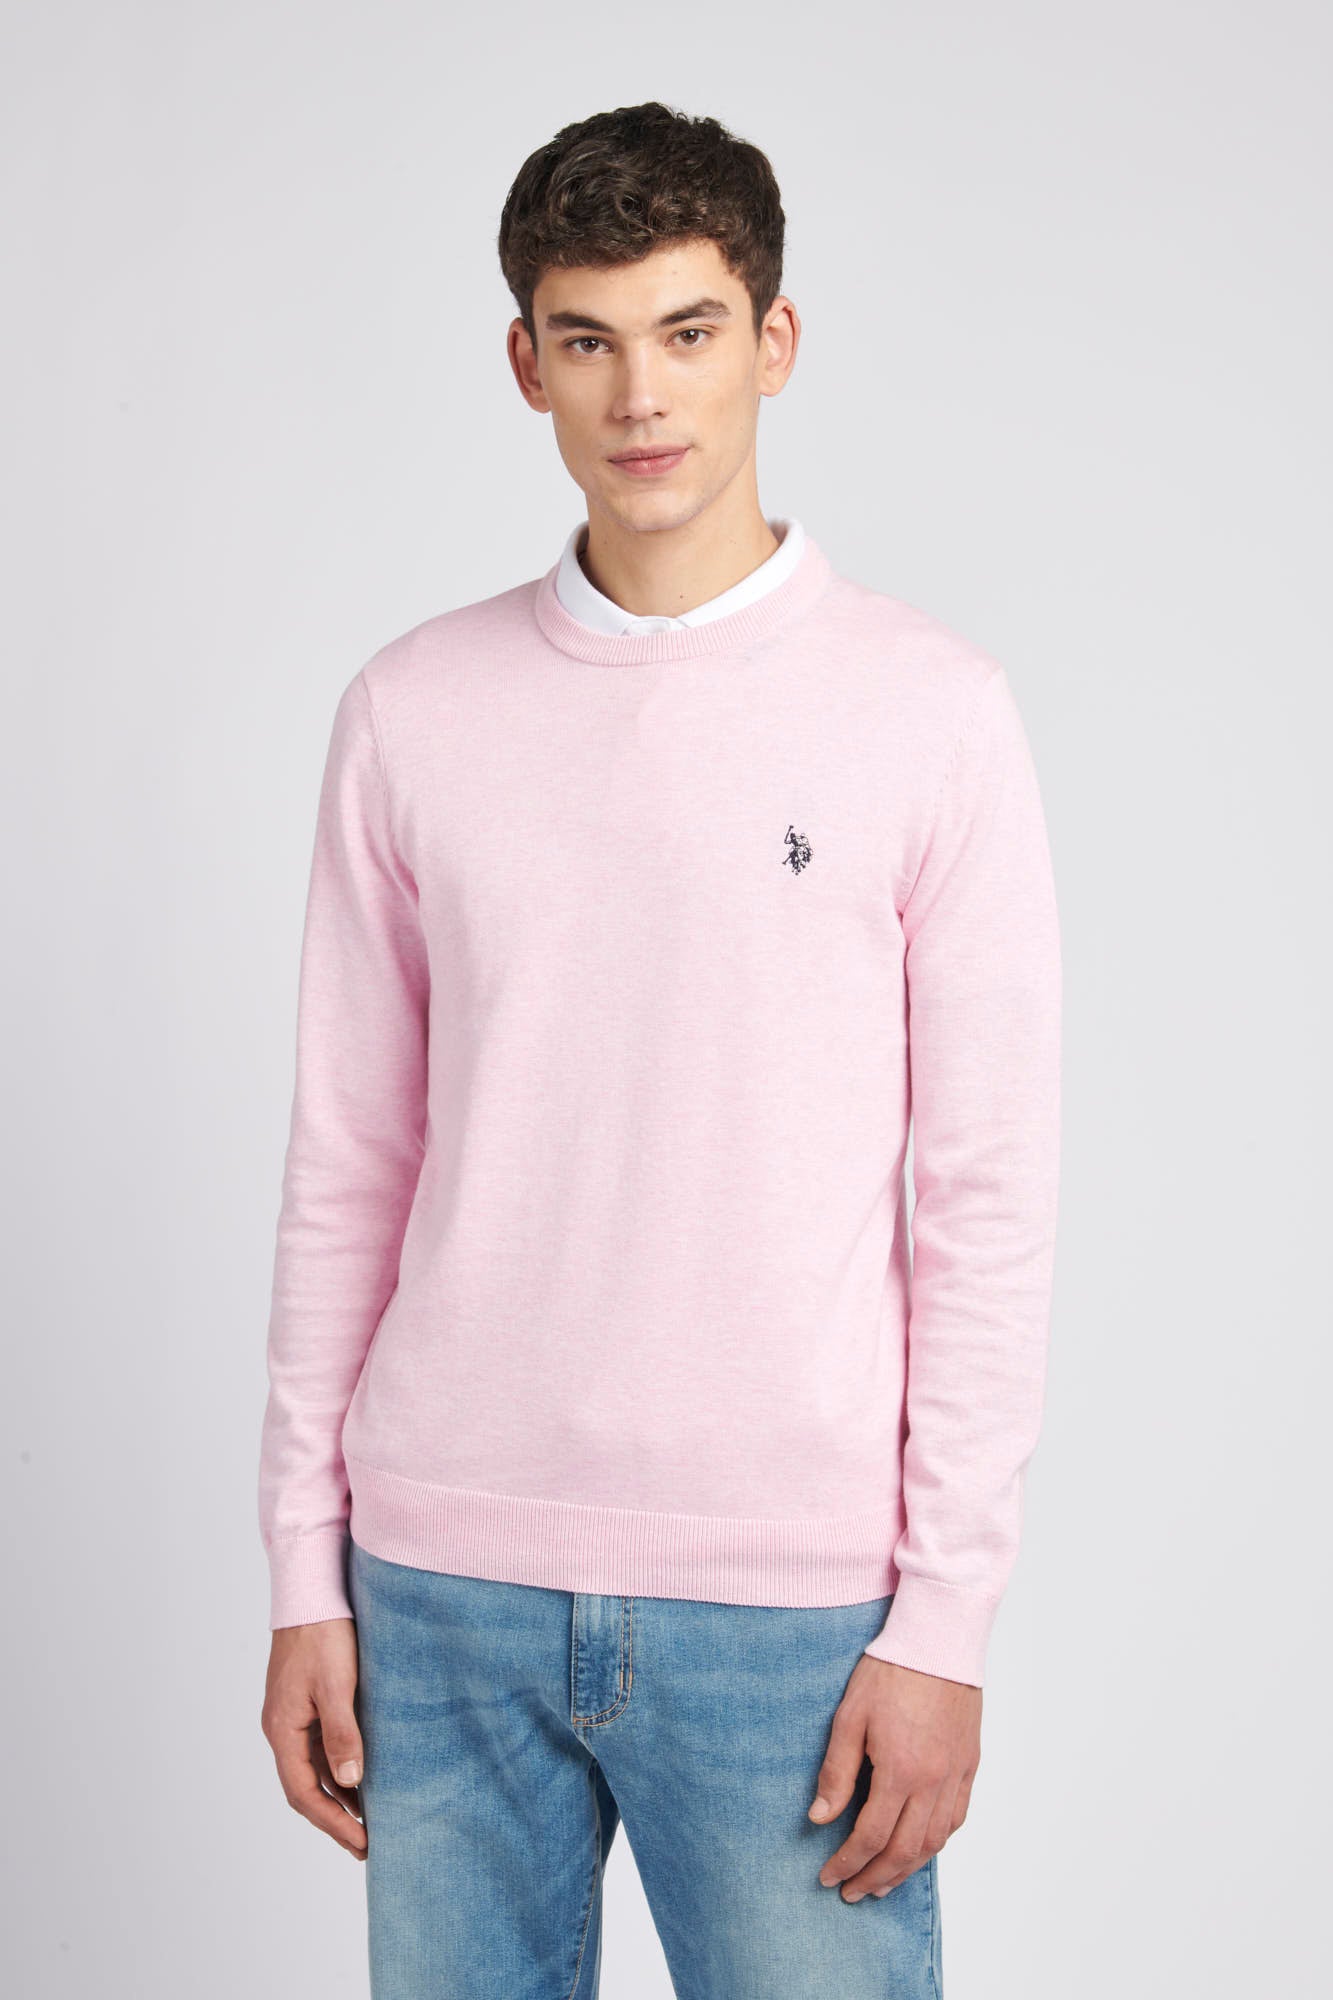 U.S. Polo Assn. Mens Crew Neck Knitted Jumper in Orchid Pink Marl